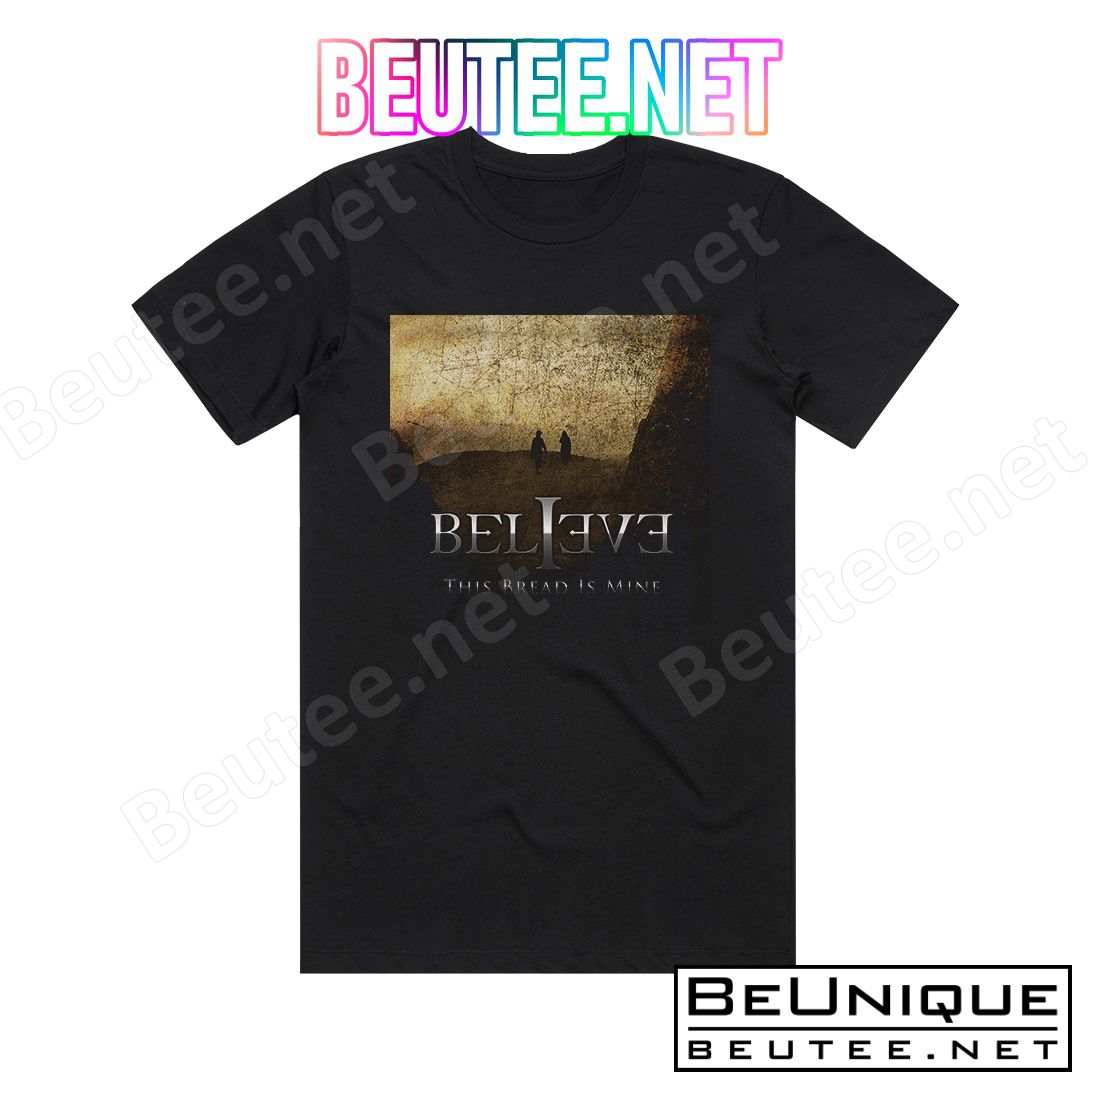 Believe This Bread Is Mine Album Cover T-Shirt